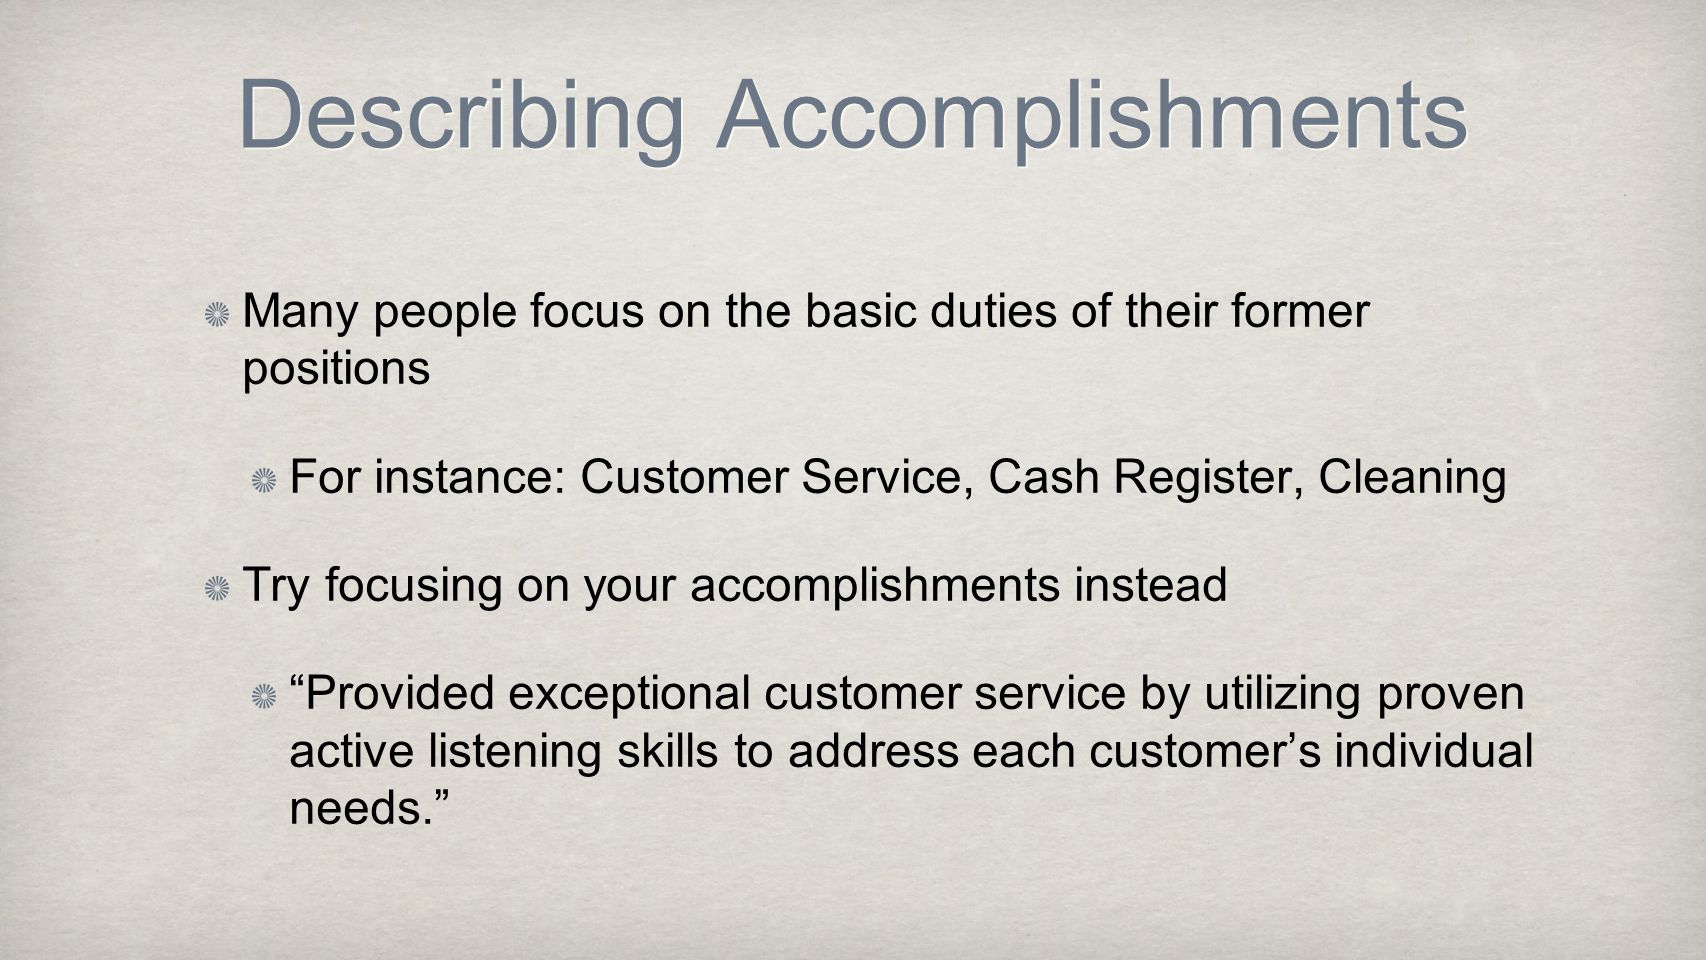 Describing Accomplishments Many people focus on the basic duties of their former positions For instance: Customer Service, Cash Register, Cleaning Try focusing on your accomplishments instead Provided exceptional customer service by utilizing proven active listening skills to address each customer’s individual needs.